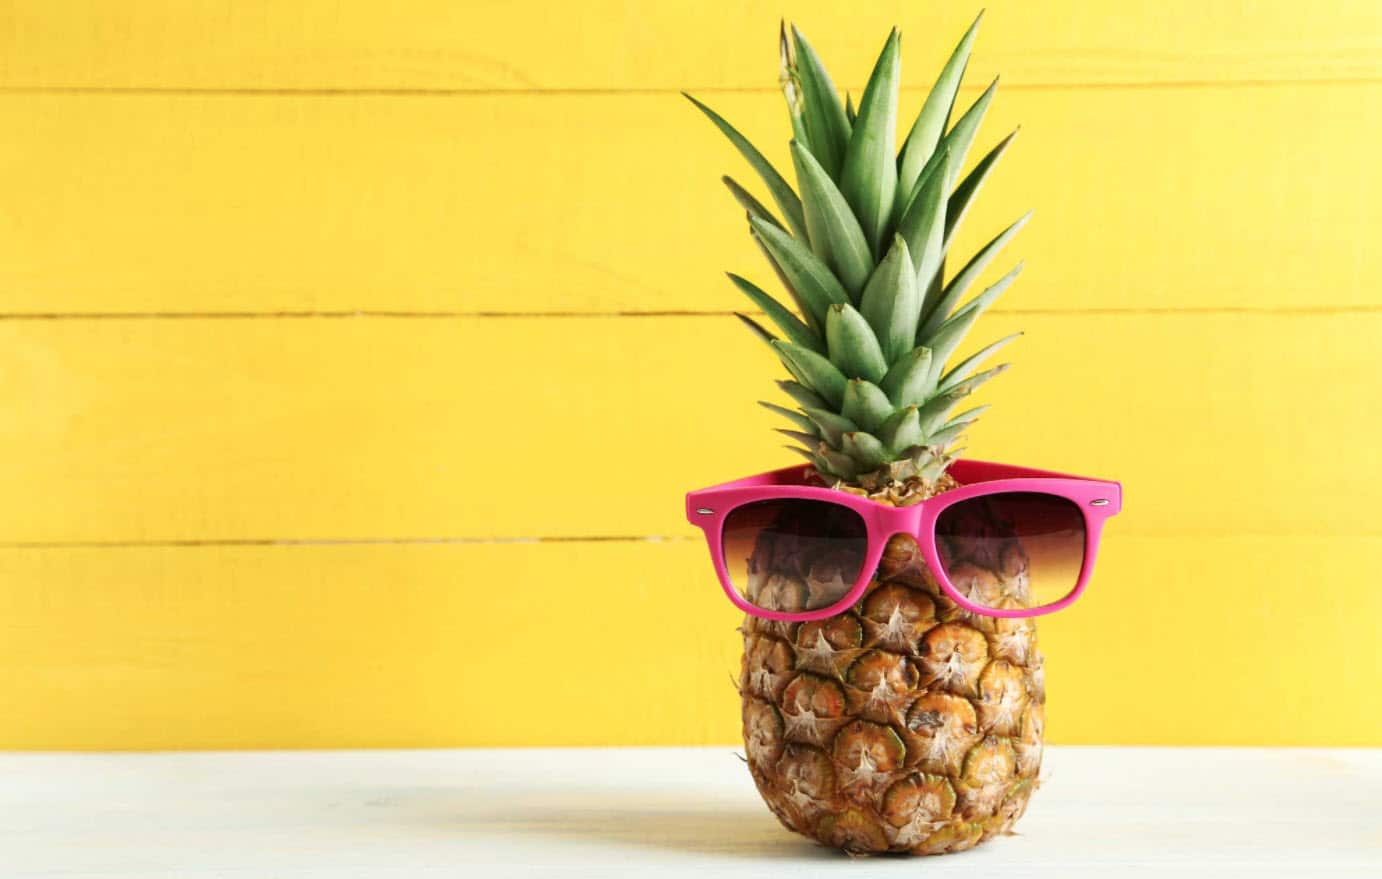 Pineapple: Health Benefits, Side Effects, Nutrition And Usage